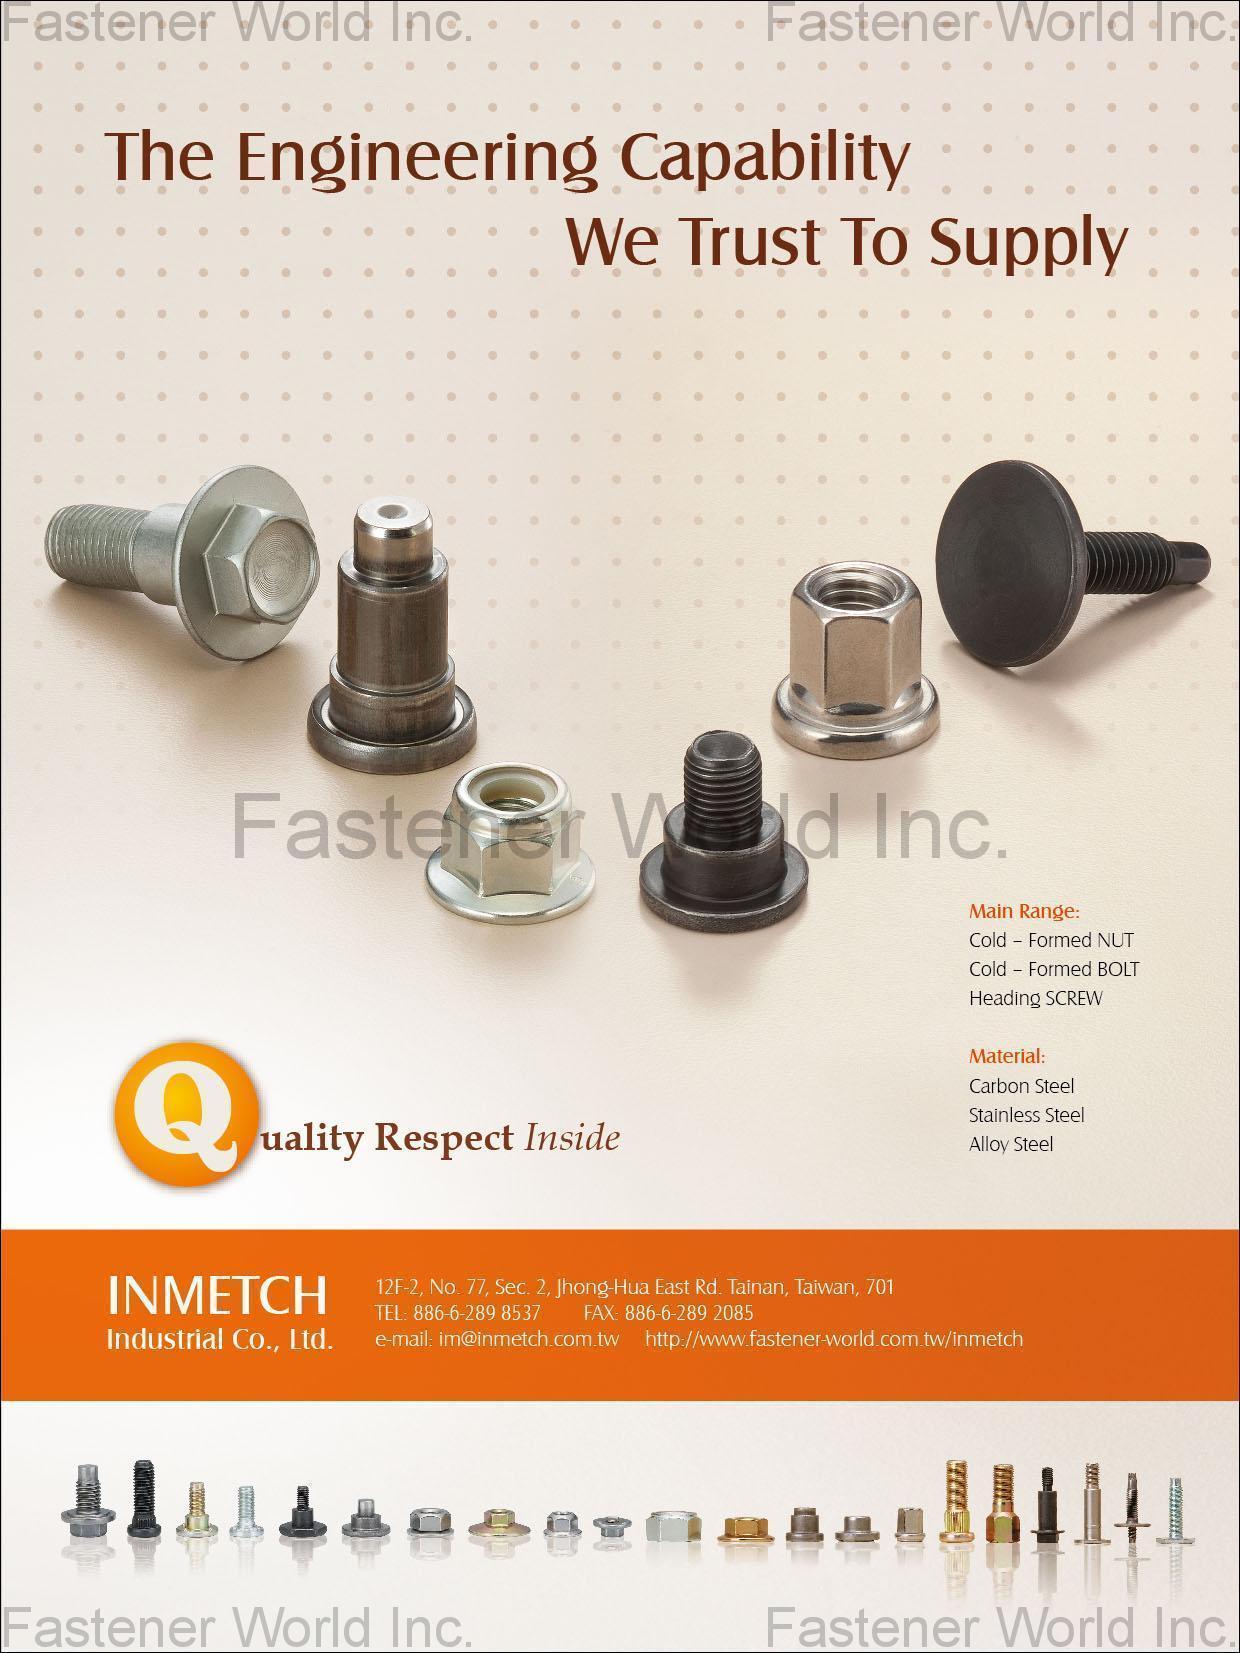 INMETCH INDUSTRIAL CO., LTD.  , Cold-Forged Thread Fasteners, Cold-Formed Nuts, Cold Formed Bolts, Heading Screws , Special Cold / Hot Forming Parts